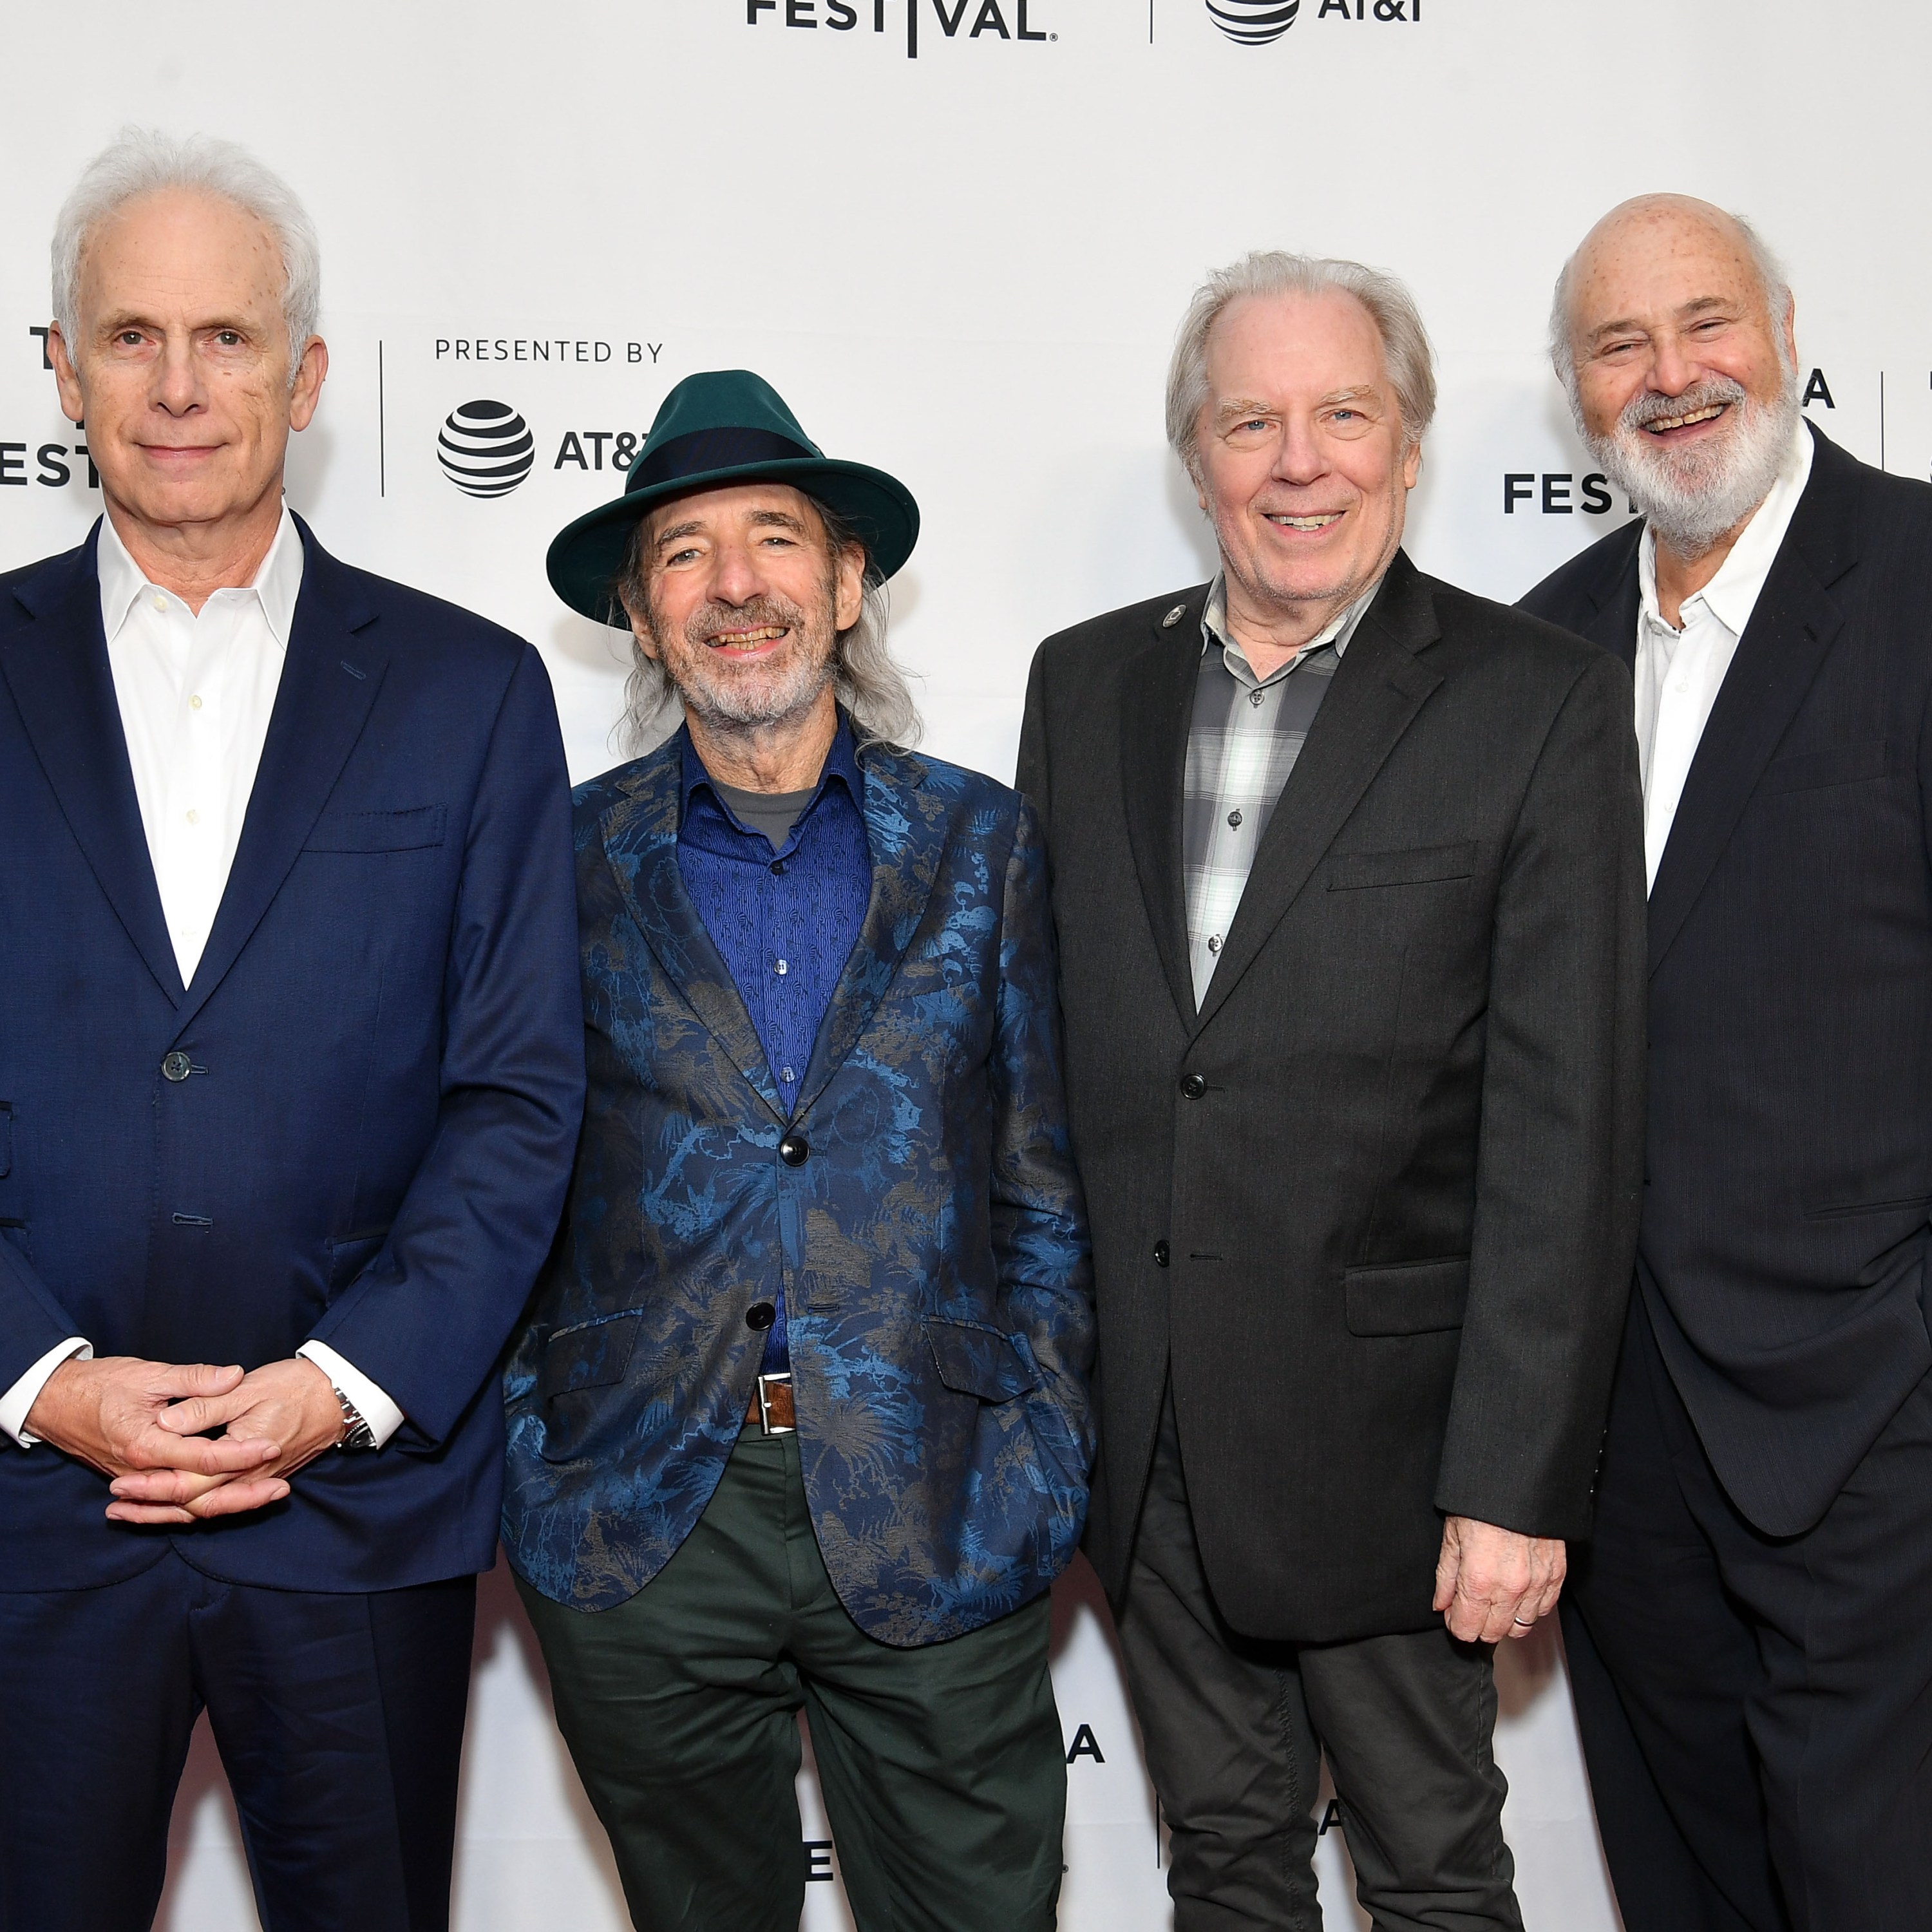 NEW YORK, NEW YORK - APRIL 27: (L-R) Christopher Guest, Harry Shearer, Michael McKean, and Rob Reiner attend the 'This Is Spinal Tap' 35th Anniversary during the 2019 Tribeca Film Festival at the Beacon Theatre on April 27, 2019 in New York City. (Photo by Dia Dipasupil/Getty Images for Tribeca Film Festival)